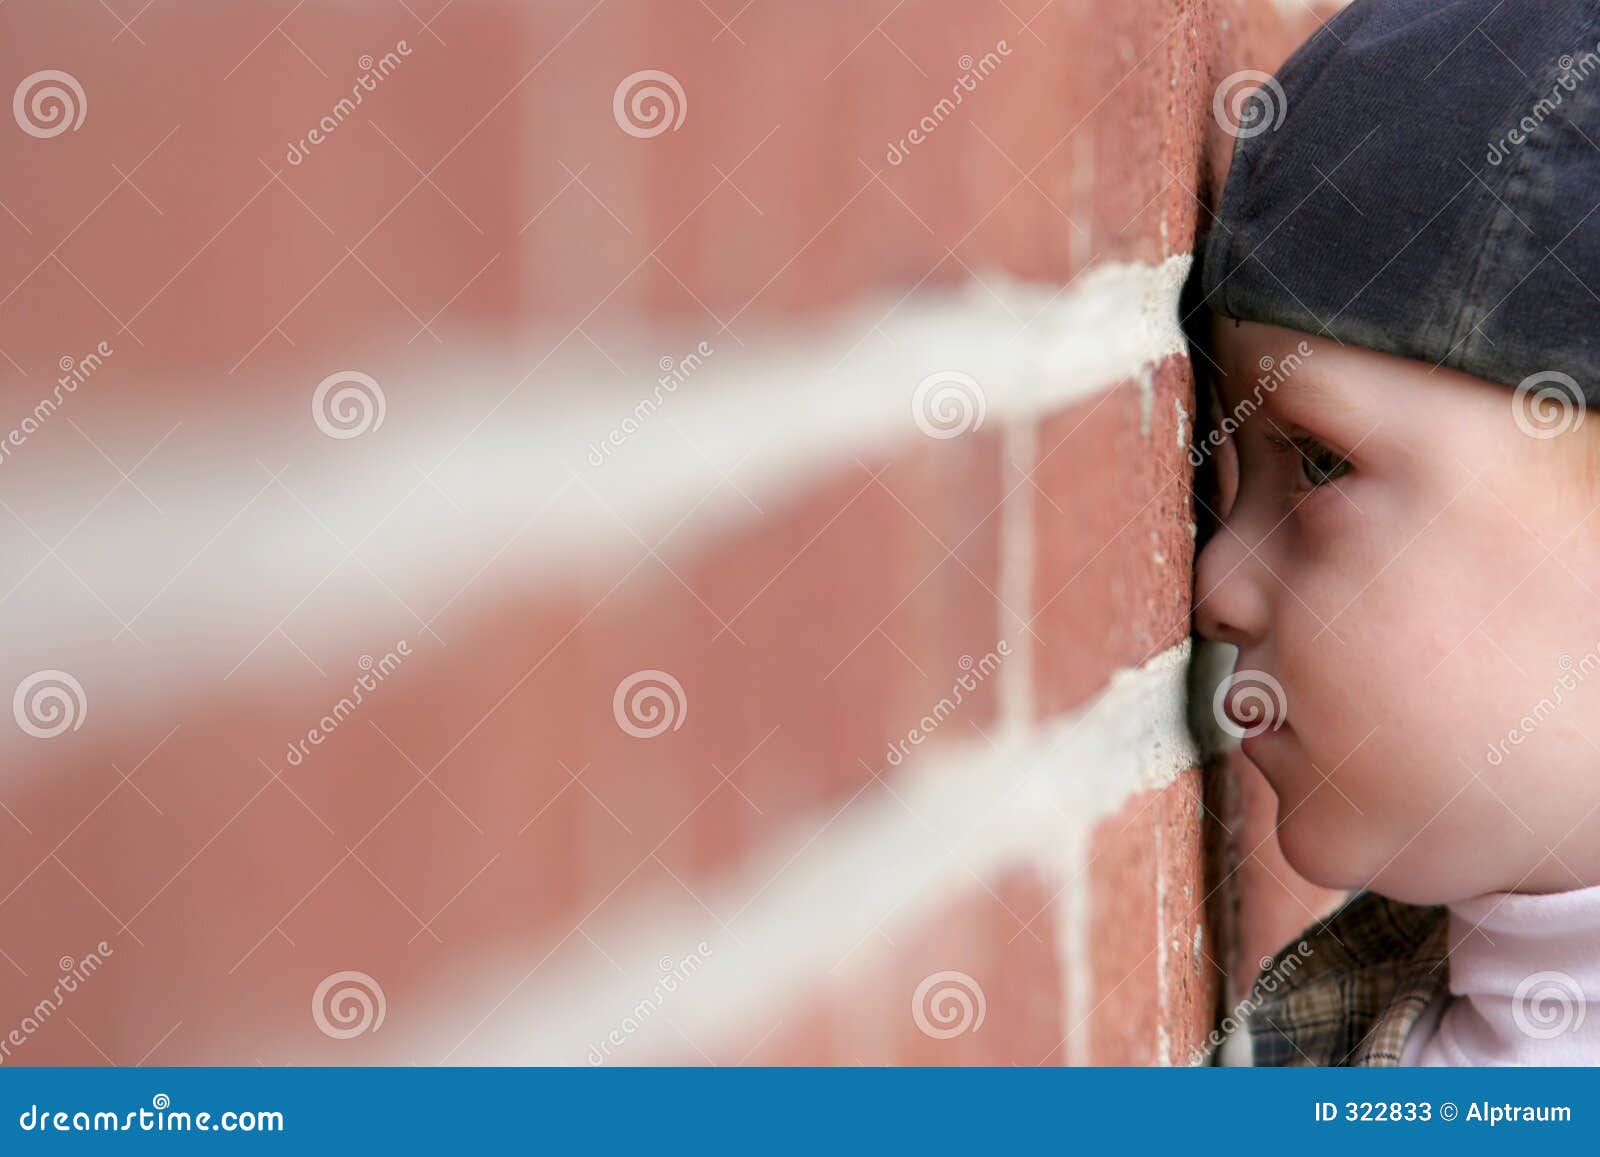 cute kid with nose squished against brick wall